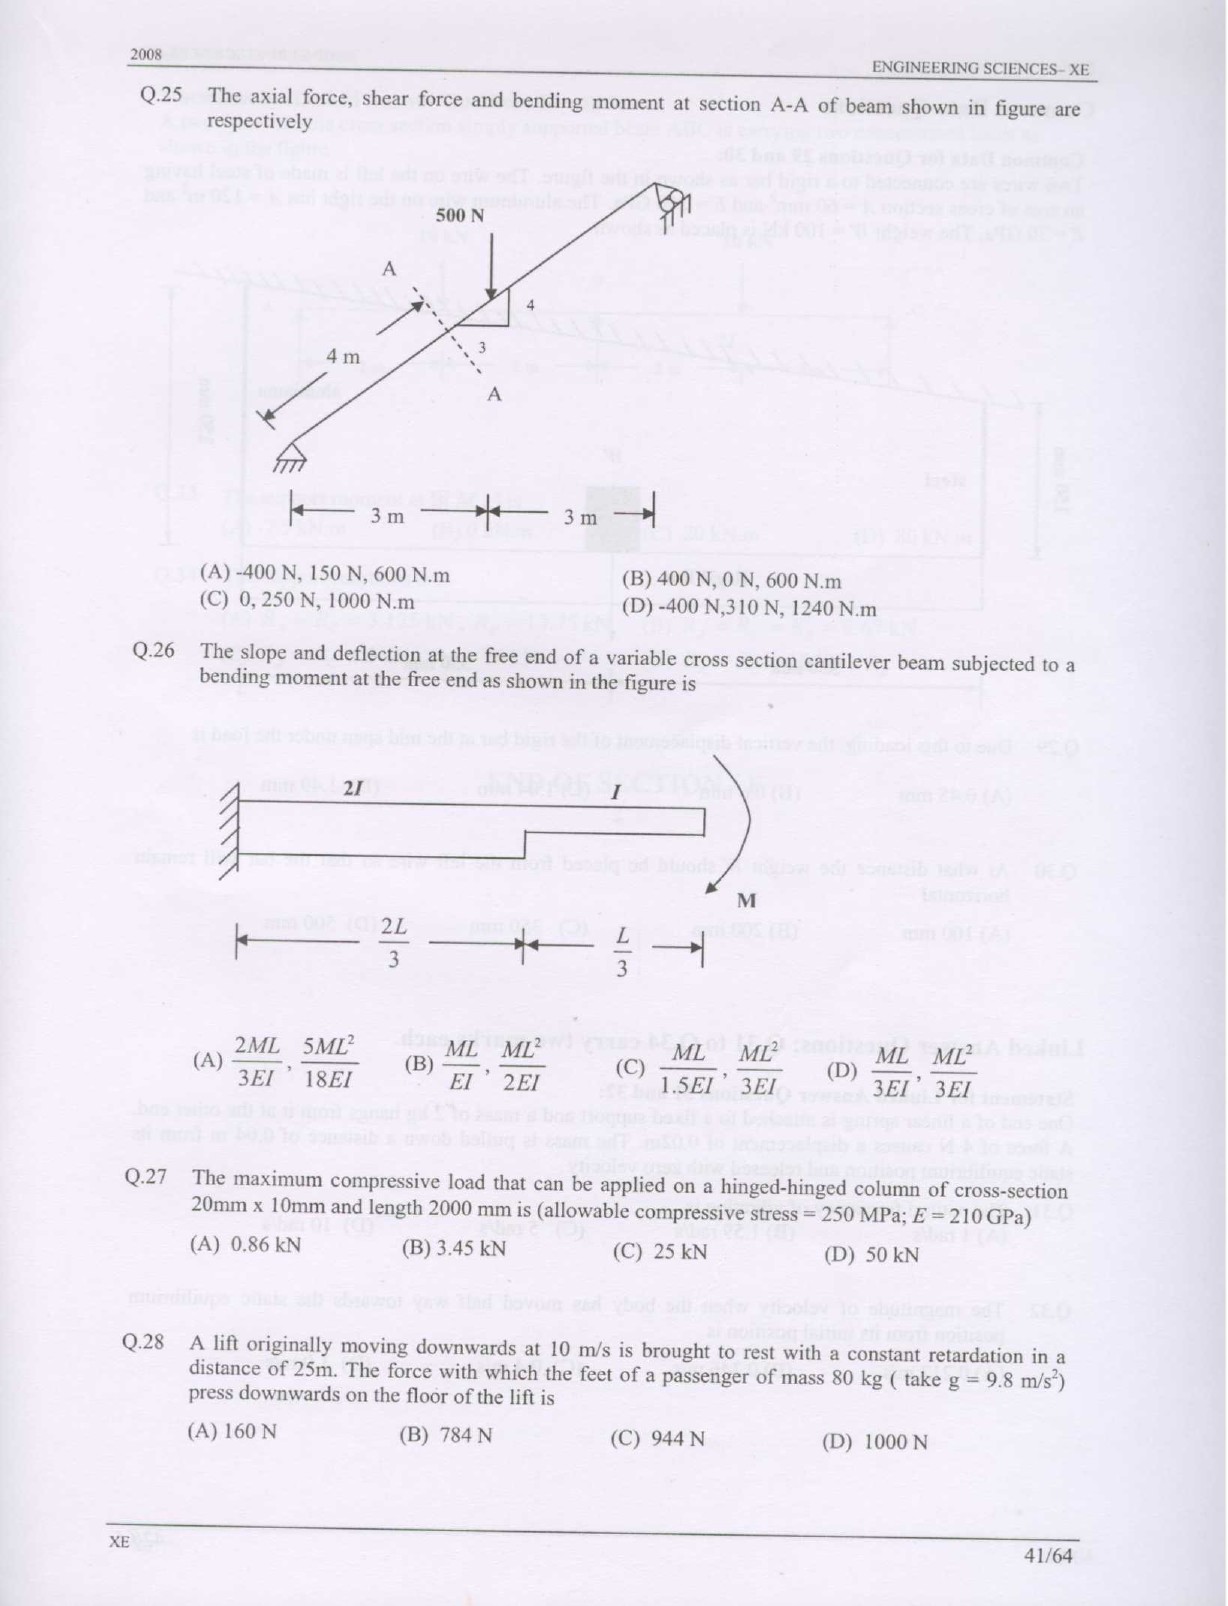 GATE Exam Question Paper 2008 Engineering Sciences 41